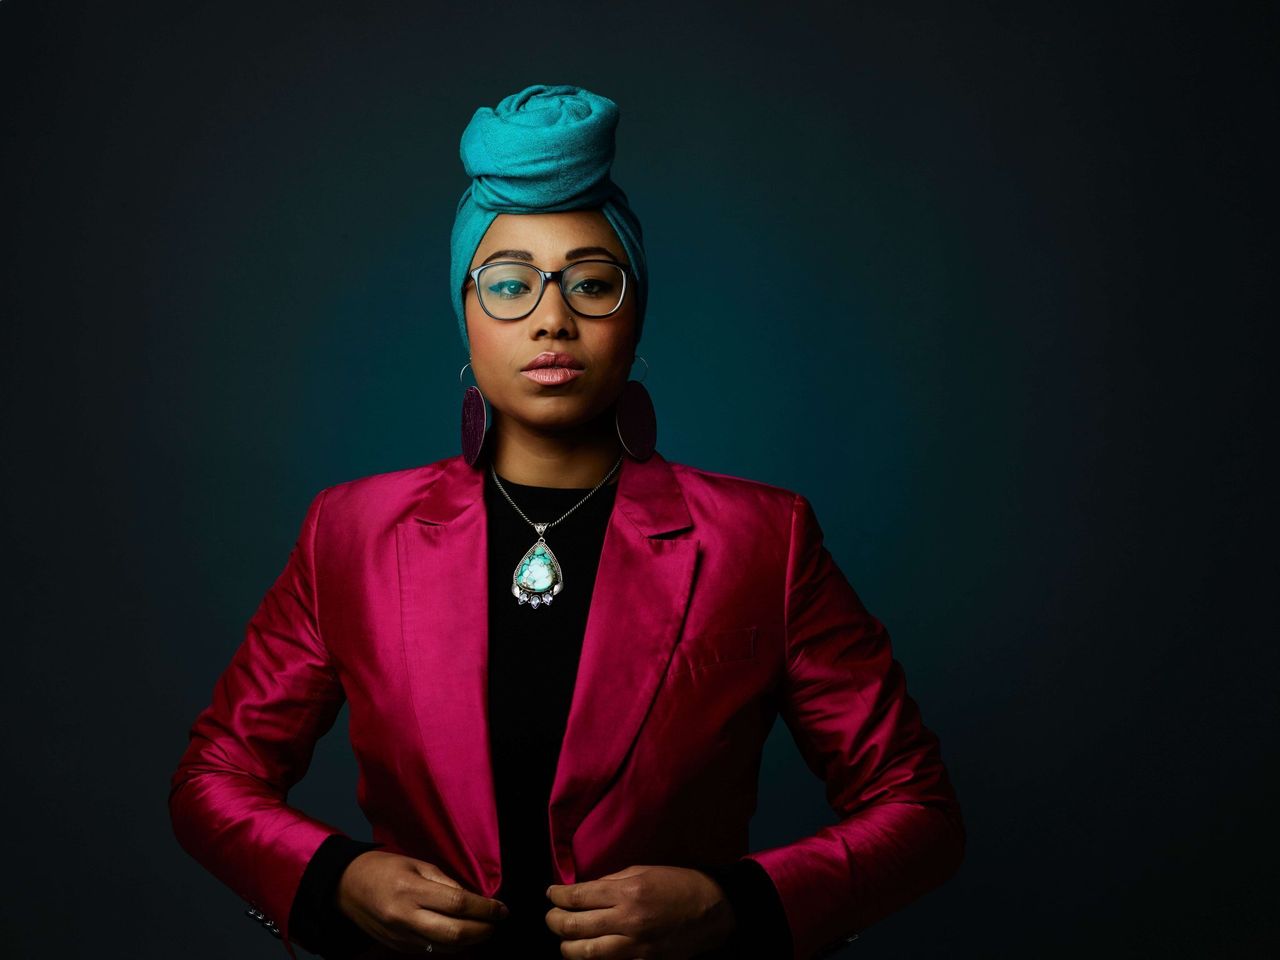 Broadcaster Yassmin, who has asked us not to use her surname